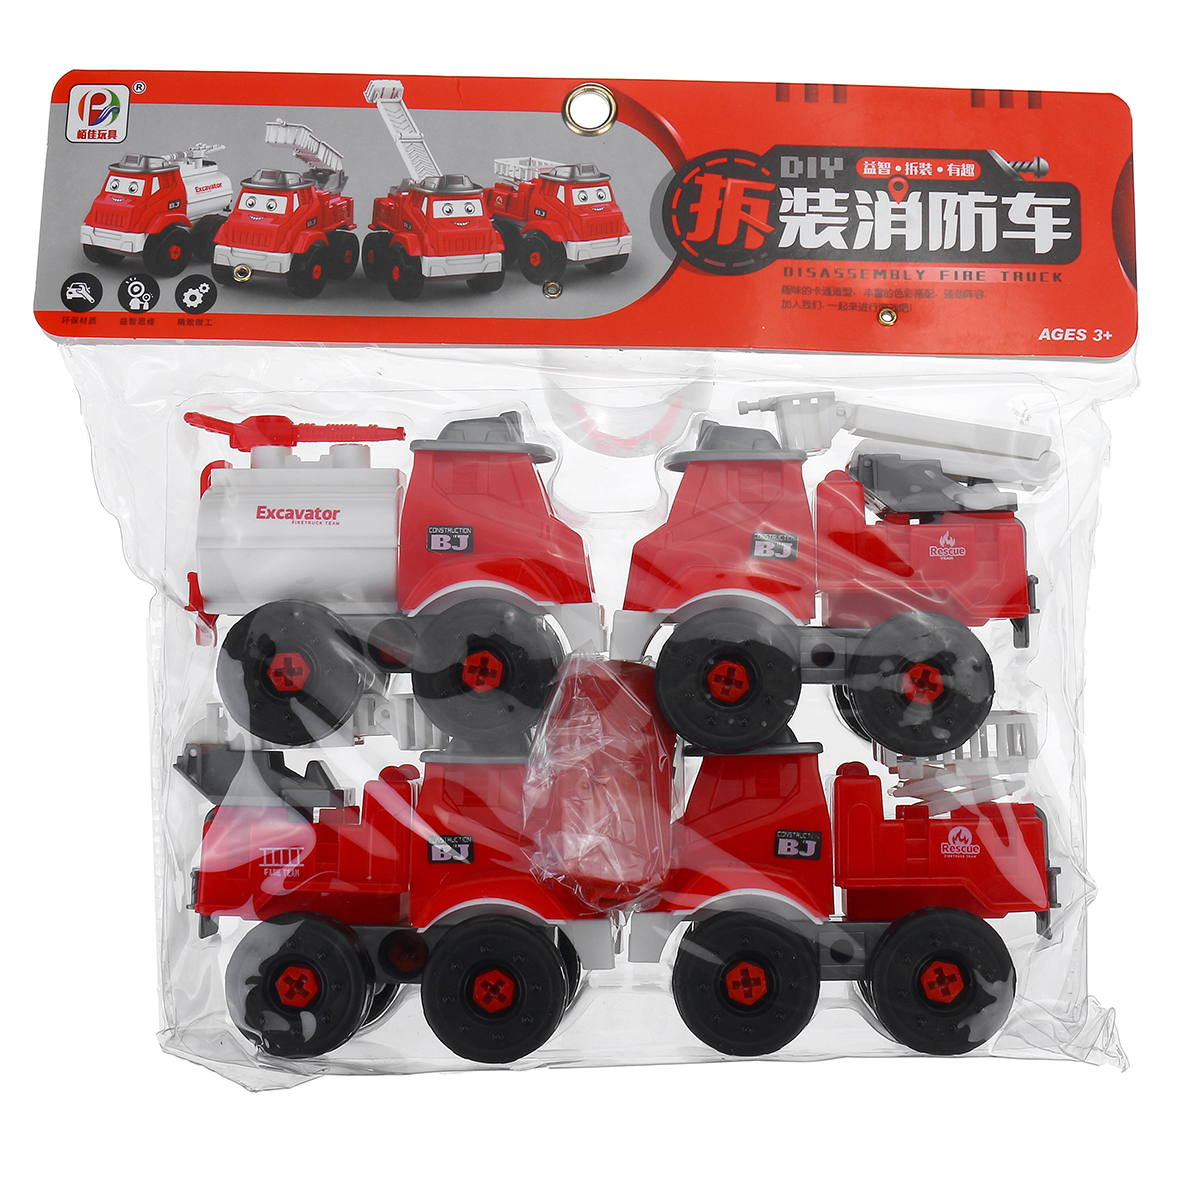 4-IN1-Truck-Construction-Sliding-Vehicle-Excavator-Detachable-Assembly-Screw-Nut-Puzzle-DIY-Assembly-1838453-13